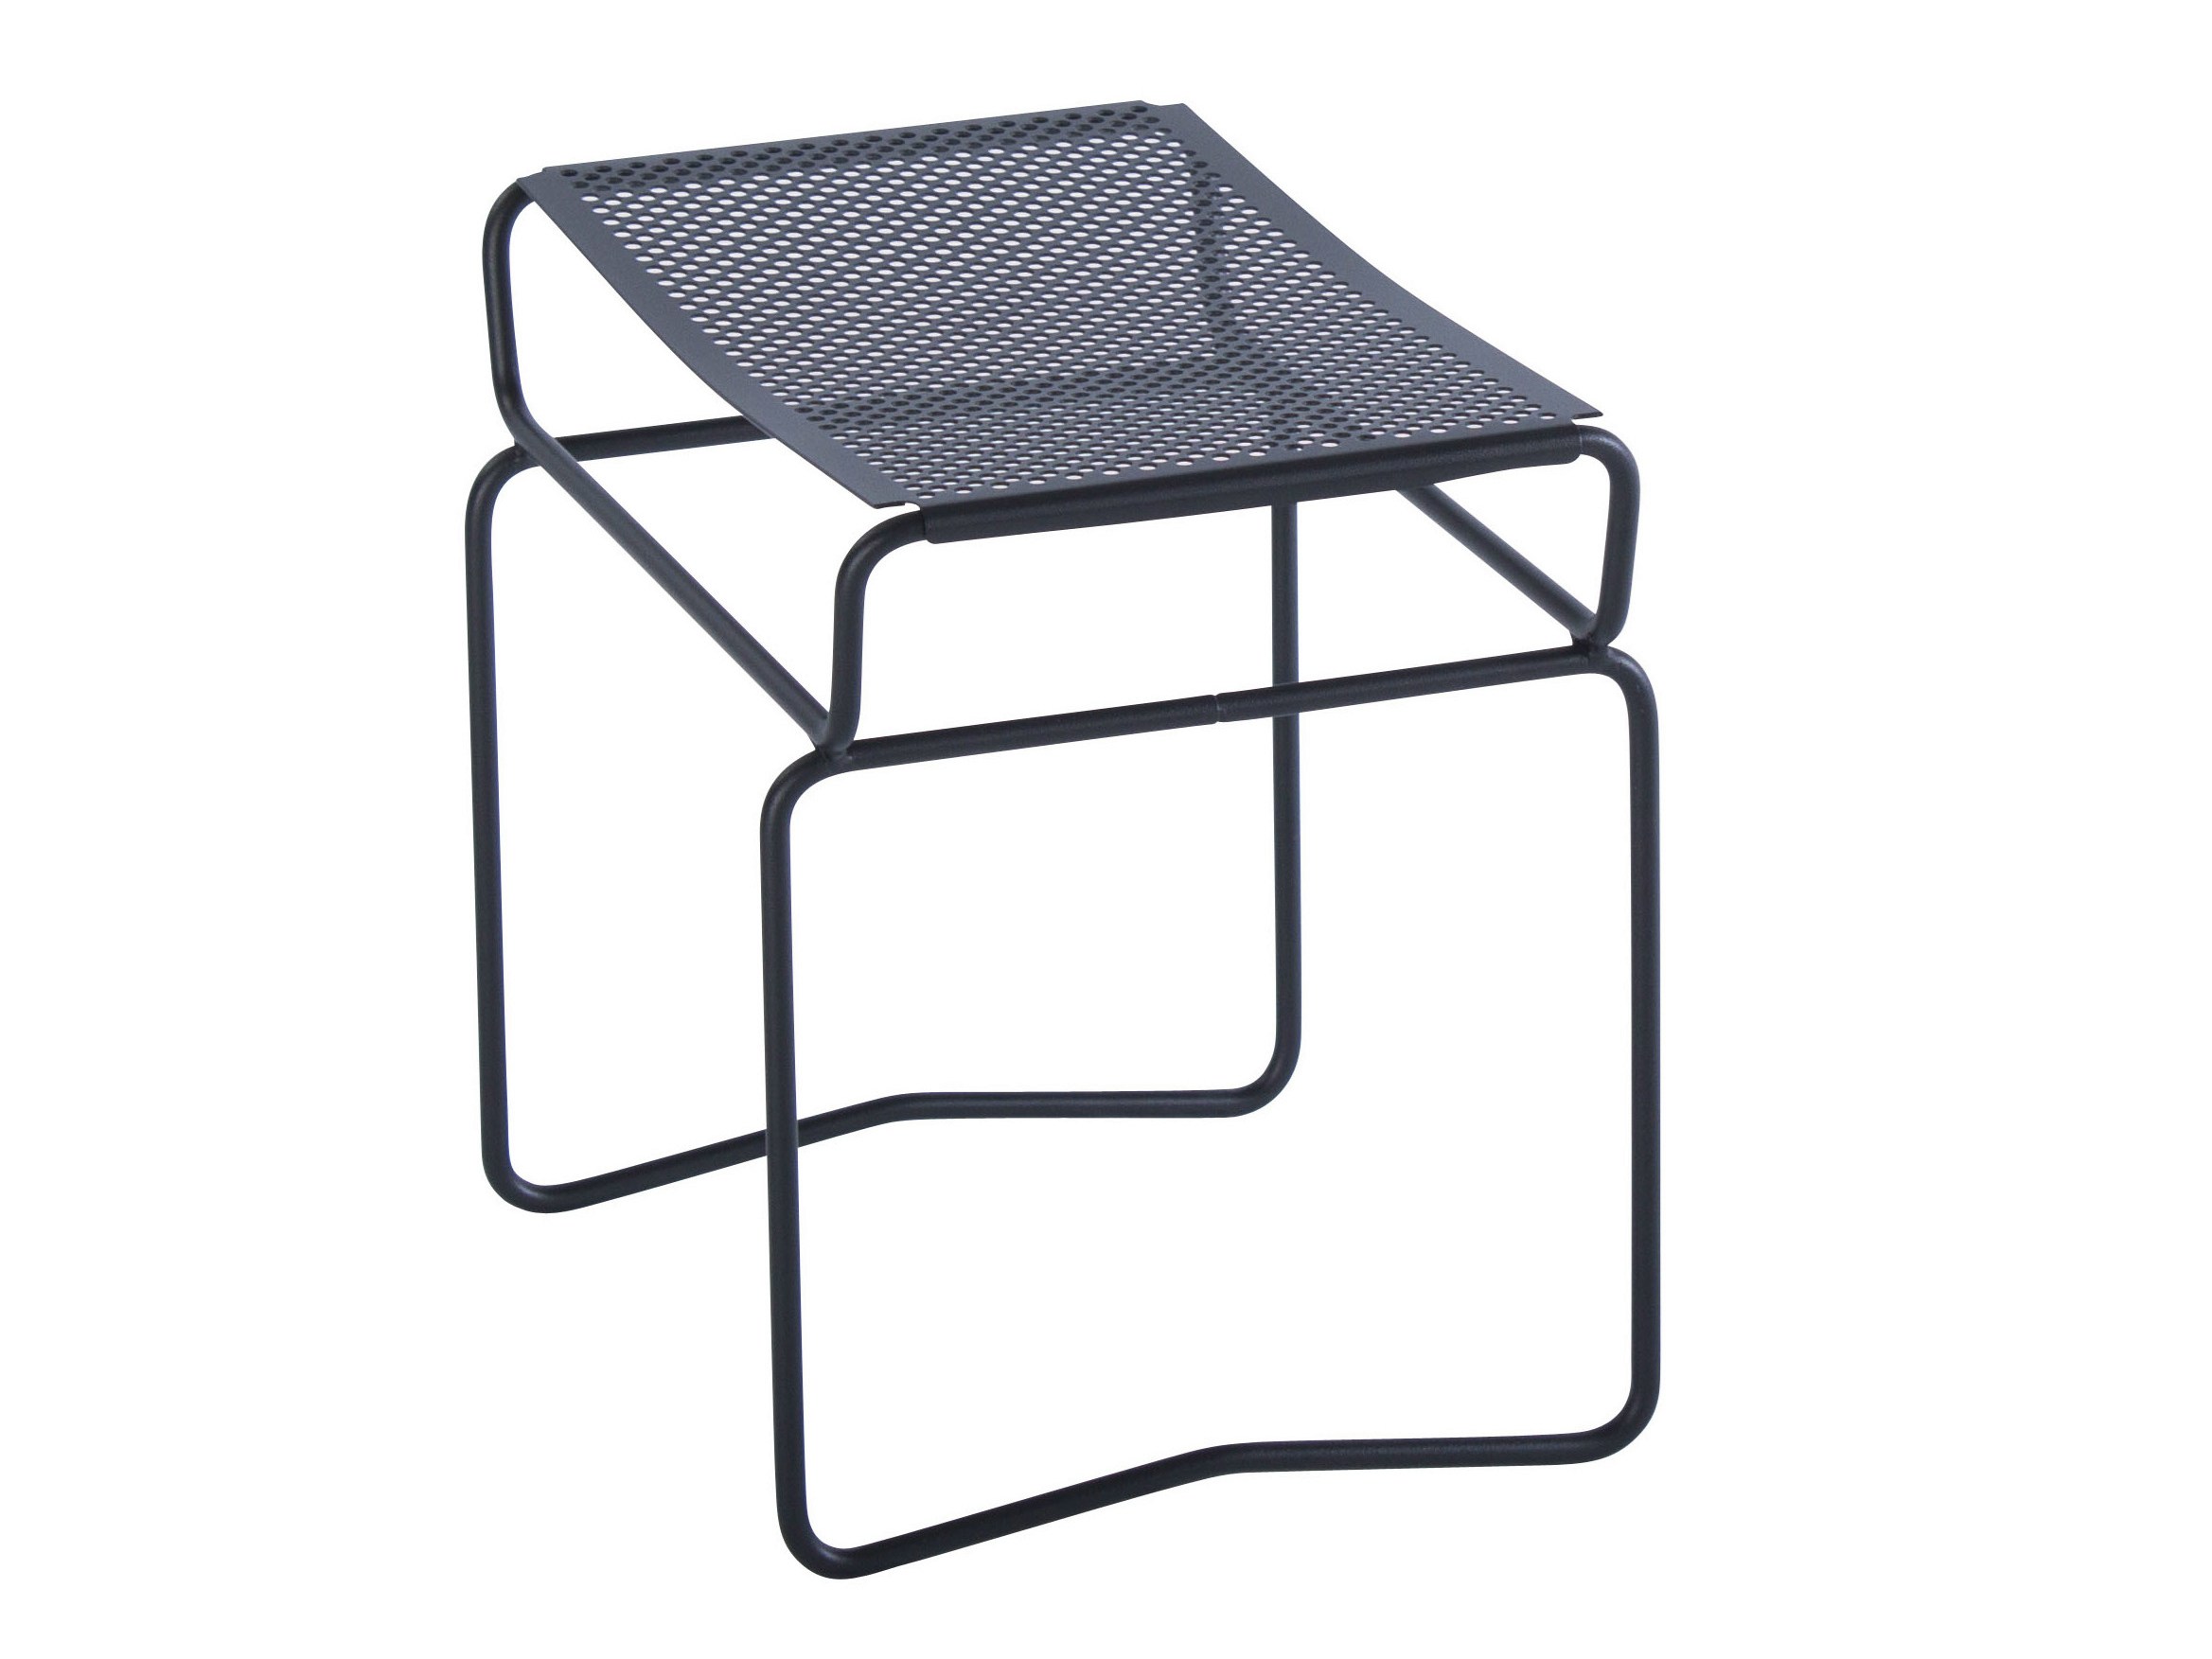 FIL Footstool by François Azambourg for AA New Design